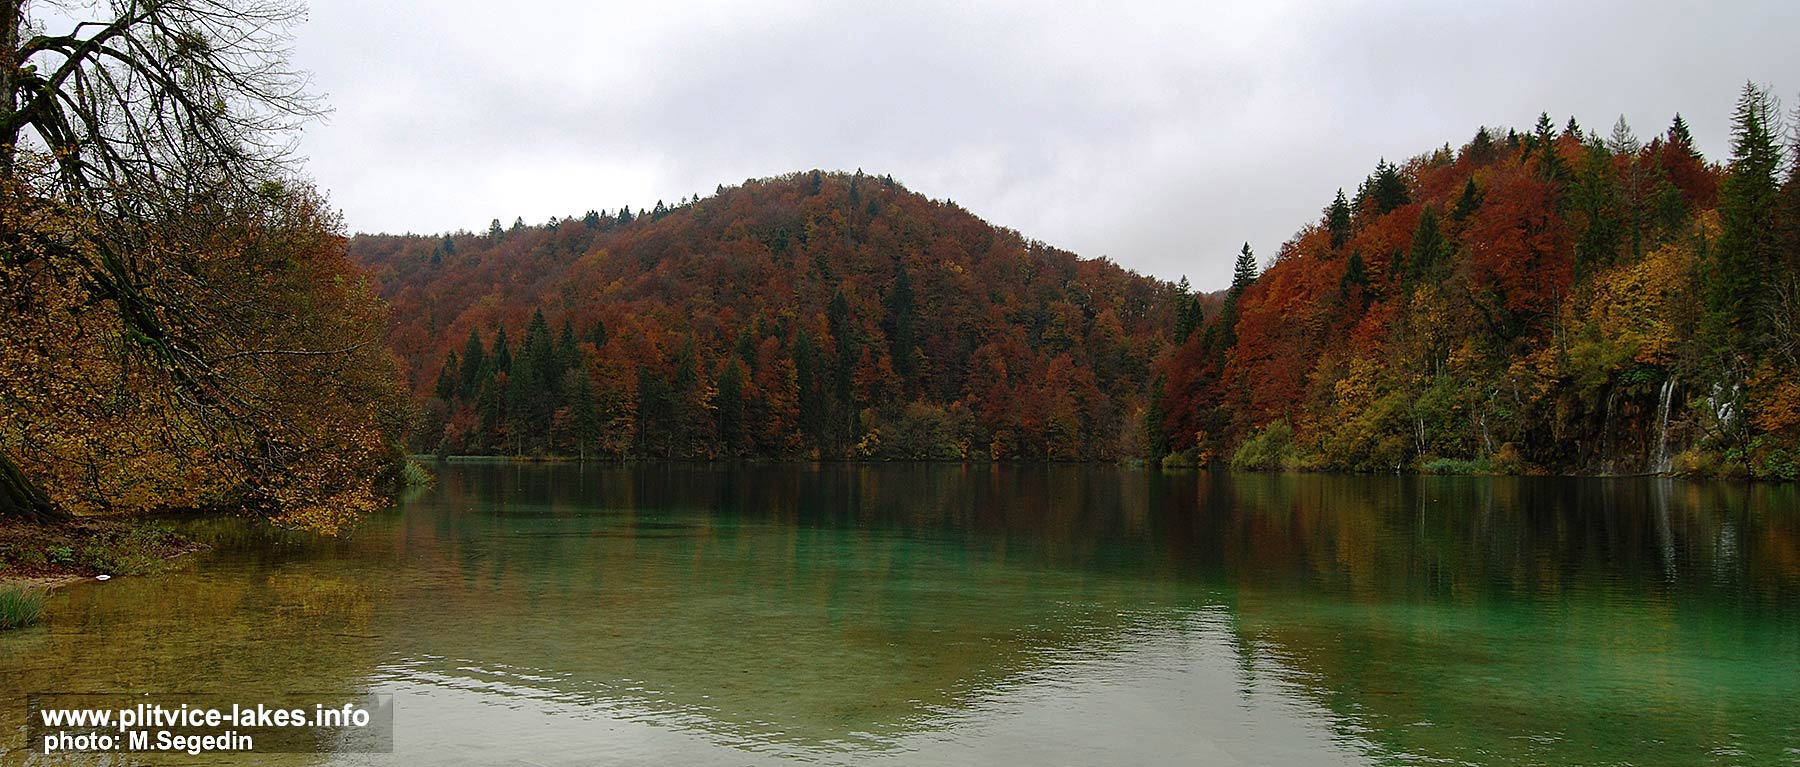 Lovely Autumn Colours at Plitvice Lakes